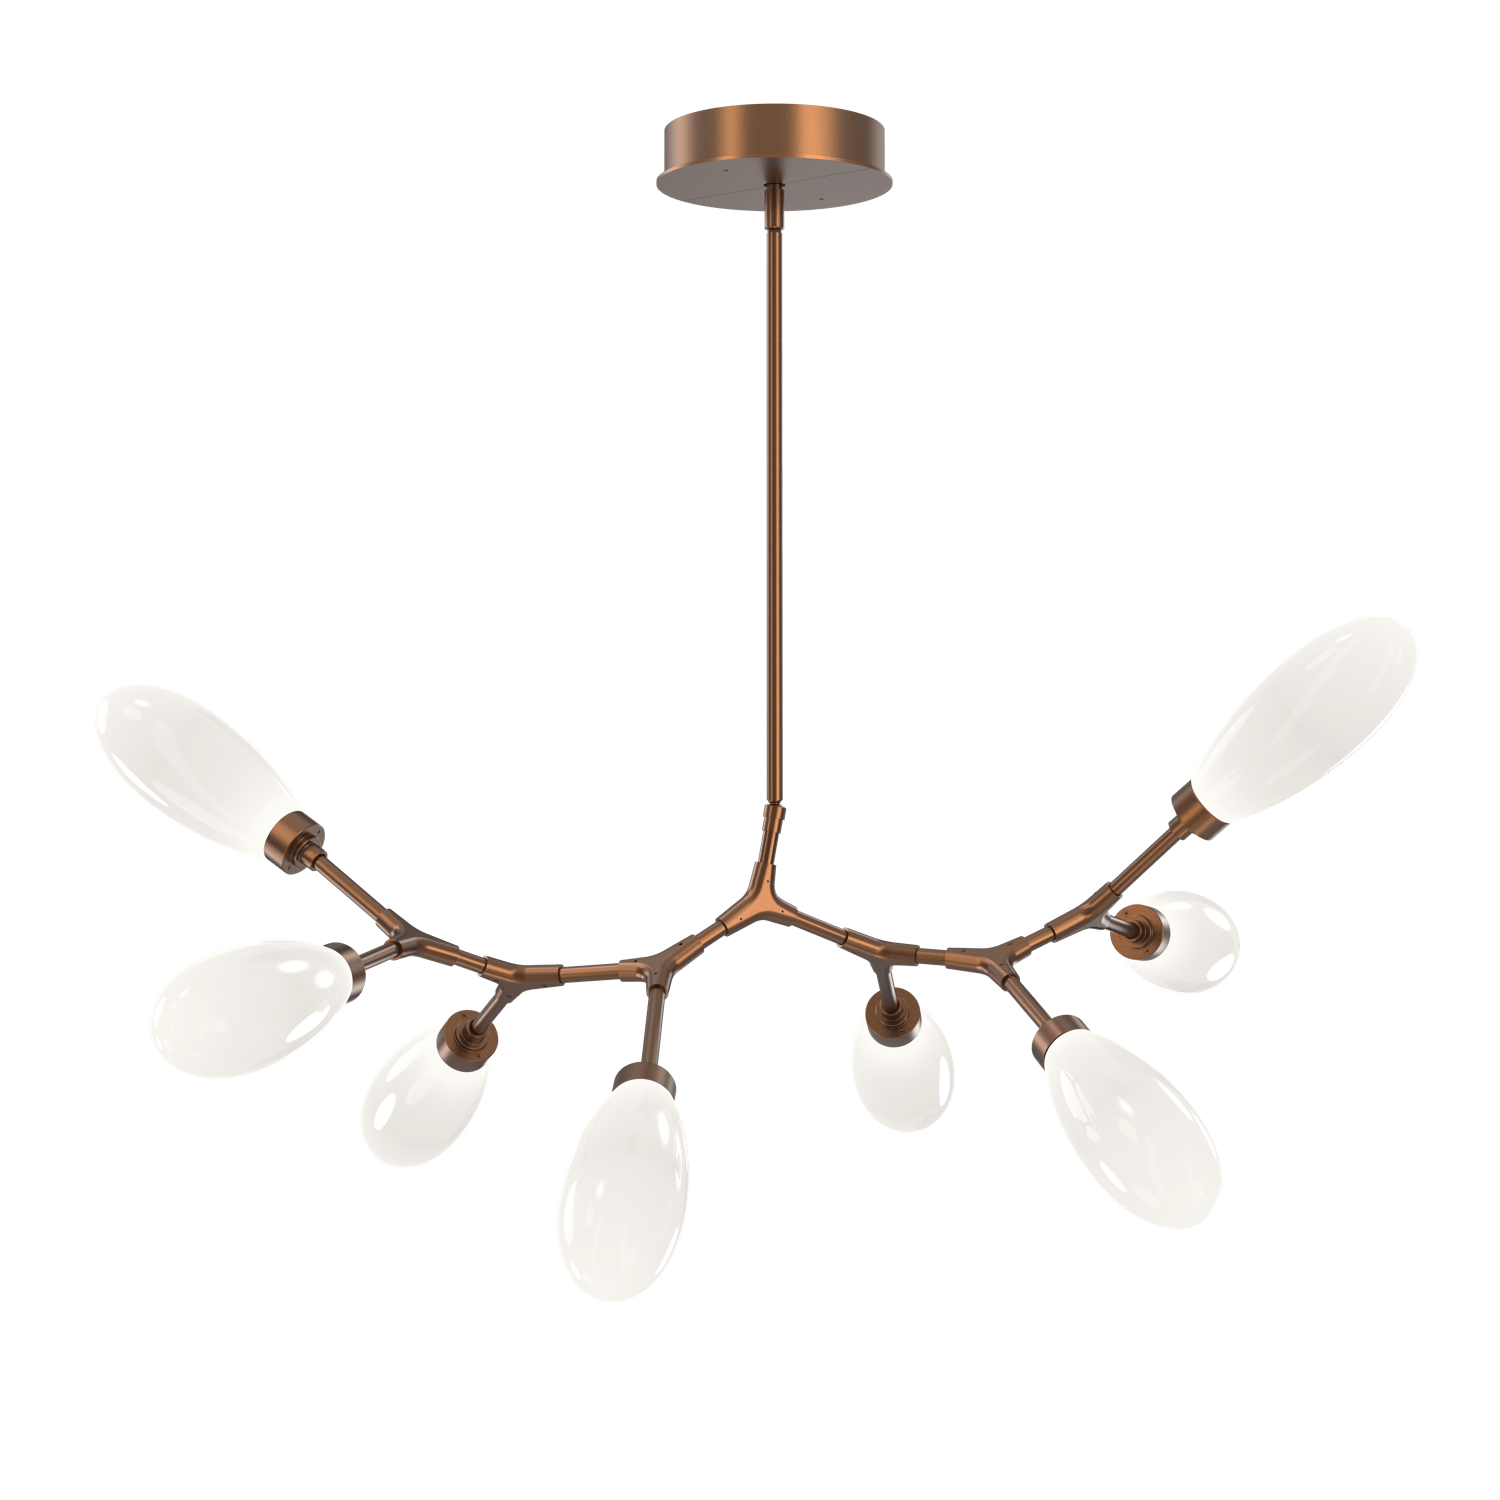 PLB0071-BB-BB-WL-LL-Hammerton-Studio-Fiori-8-light-organic-branch-chandelier-with-burnished-bronze-finish-and-opal-white-glass-shades-and-LED-lamping